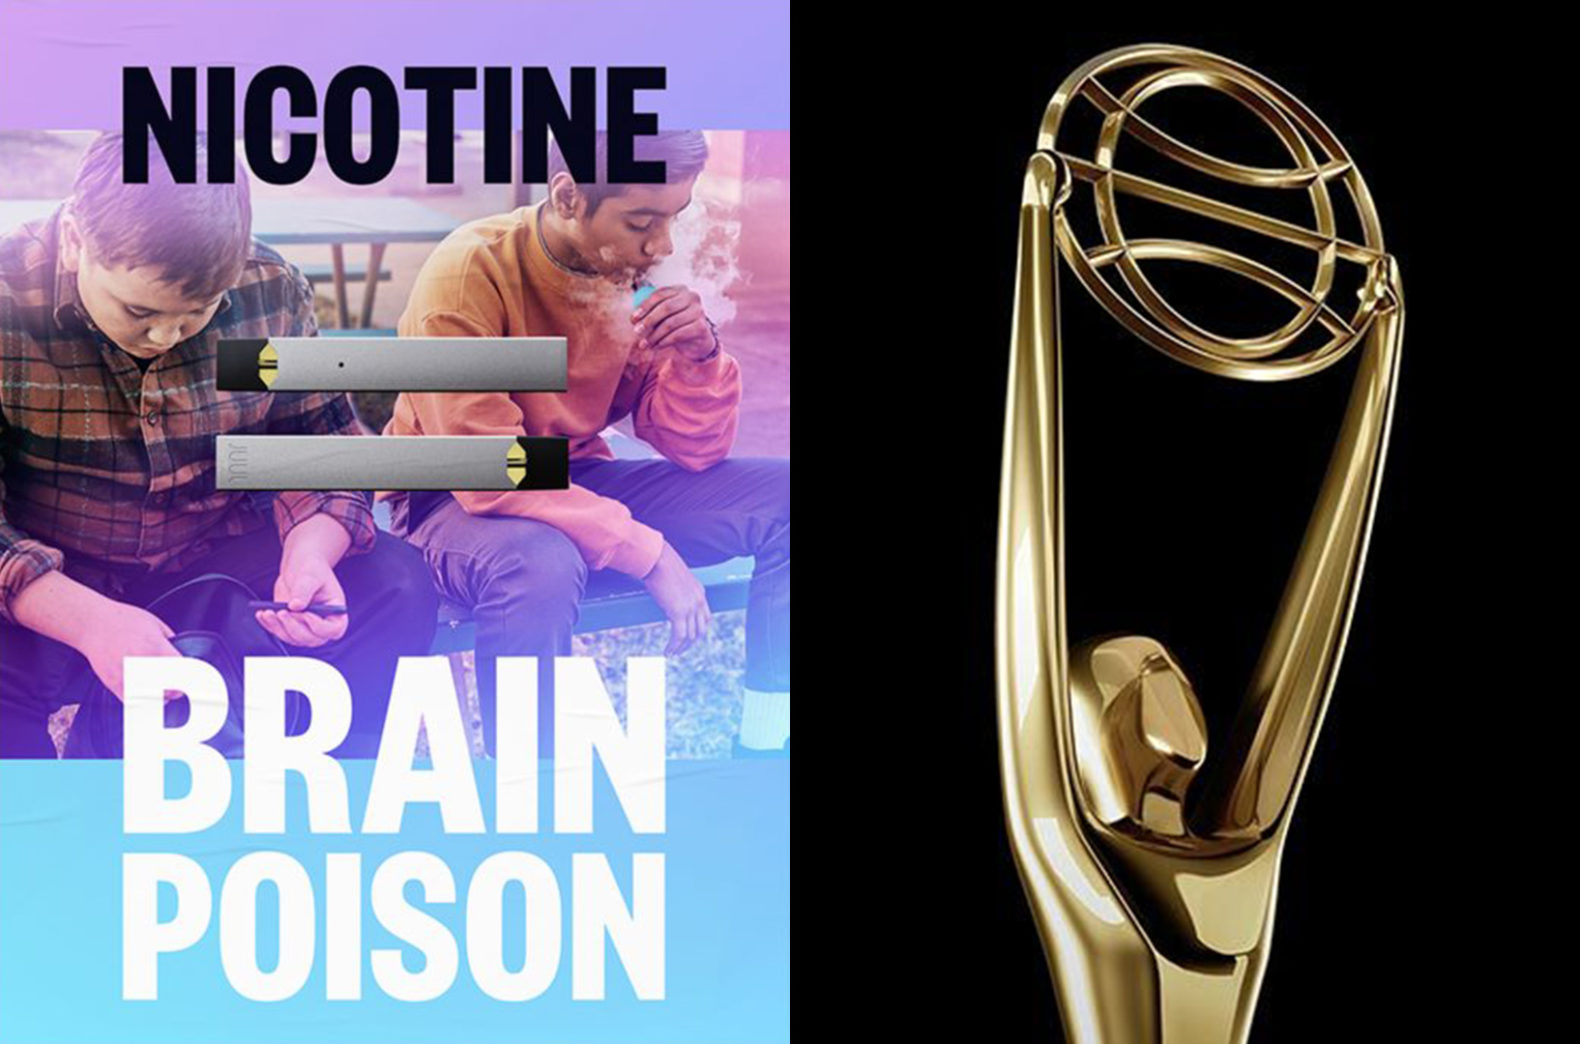 Nicotine equals brain poison. Two images in a grid. Image to the left is the campaign example featuring two male presenting teens with their heads down smoking a vape pen with a copy overlay that reads Nicotine equals brain poison. The right image is the gold Clio award on a black background. 